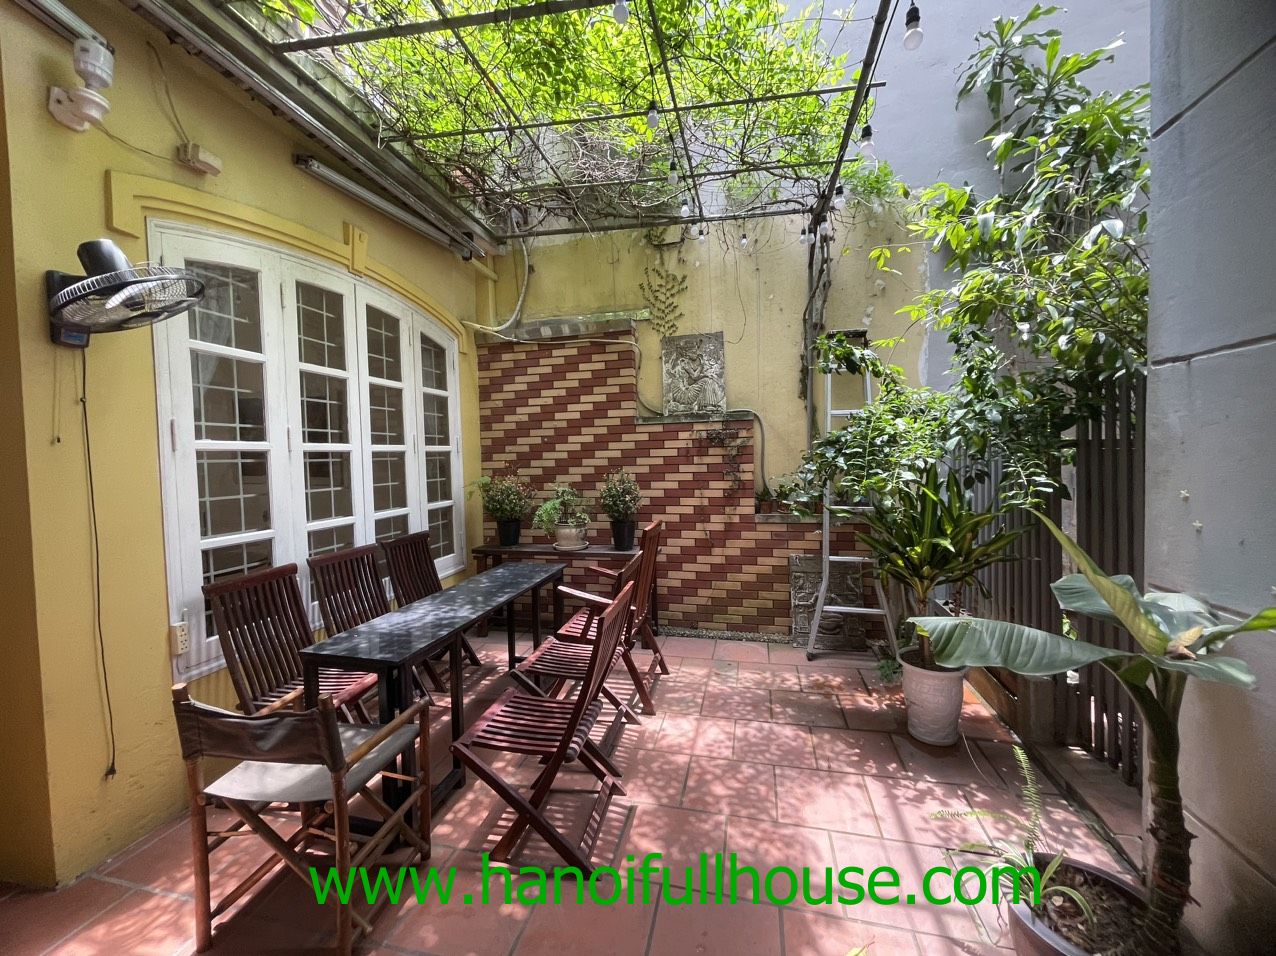 4 Bedroom house with beautiful yard in Tay Ho dist to rent, close to Westlake